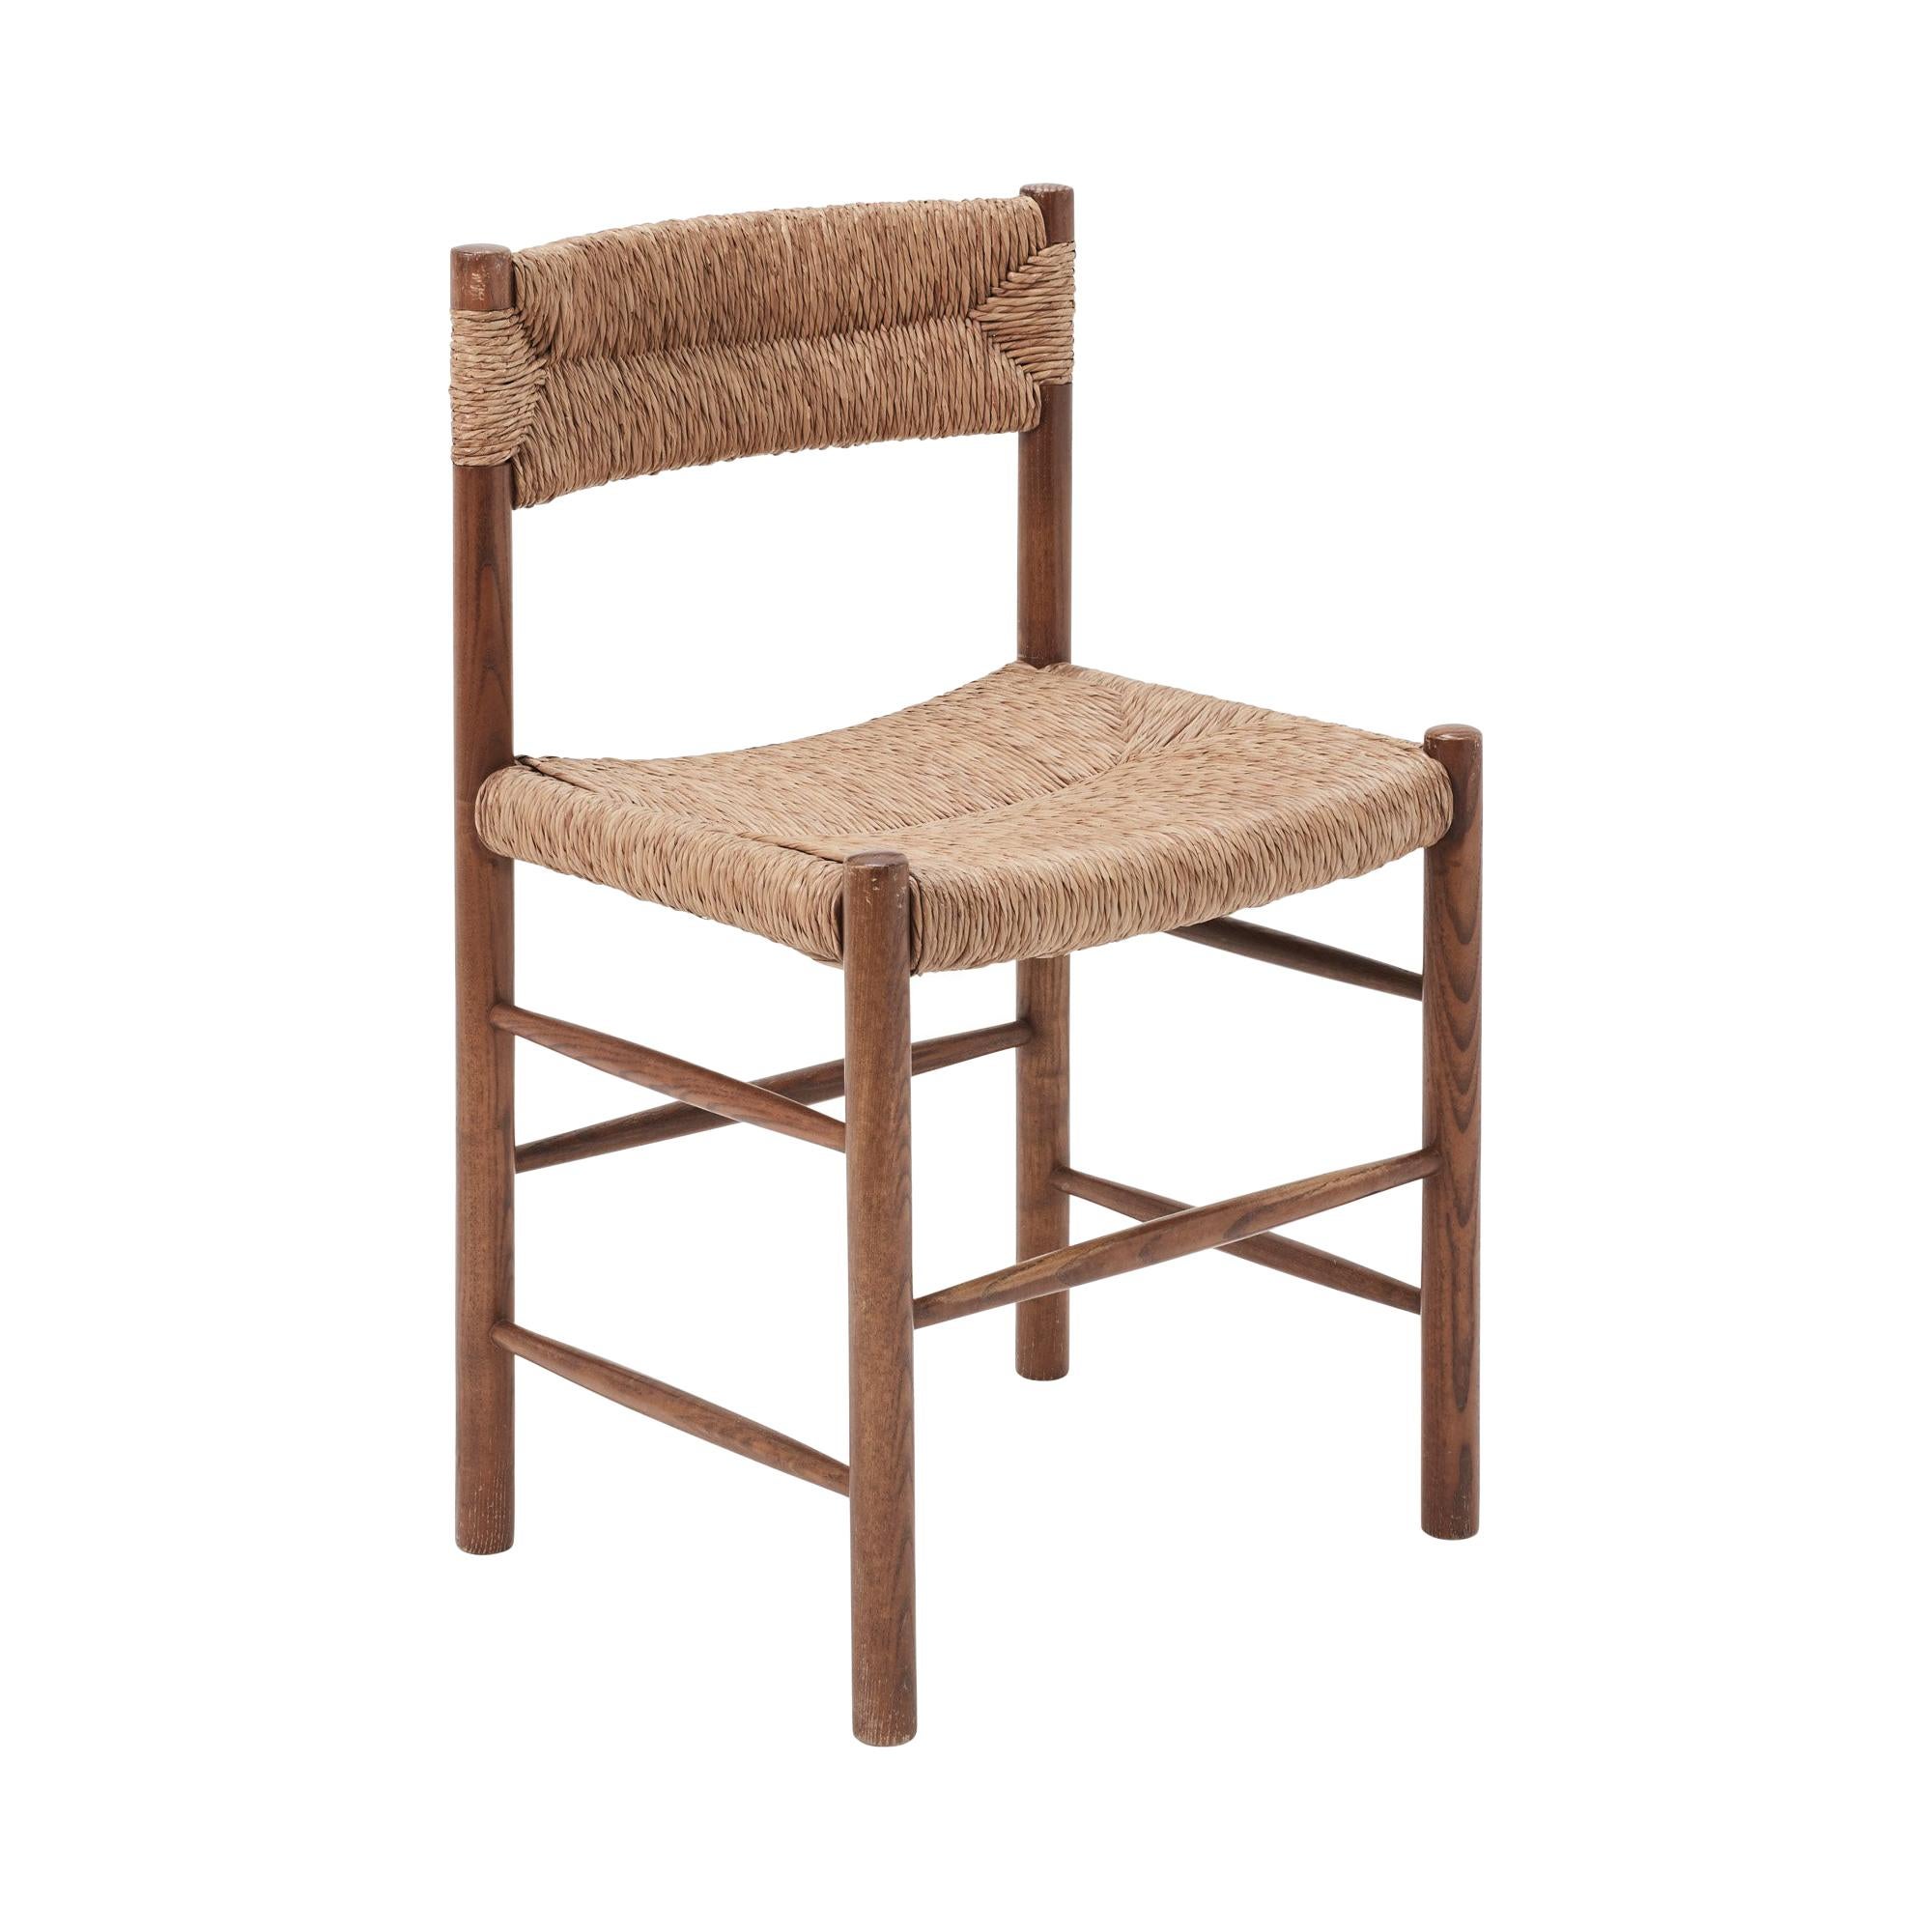 1950's “Dordogne” Chair in Straw & Wood by Charlotte Perriand for Robert Sentou